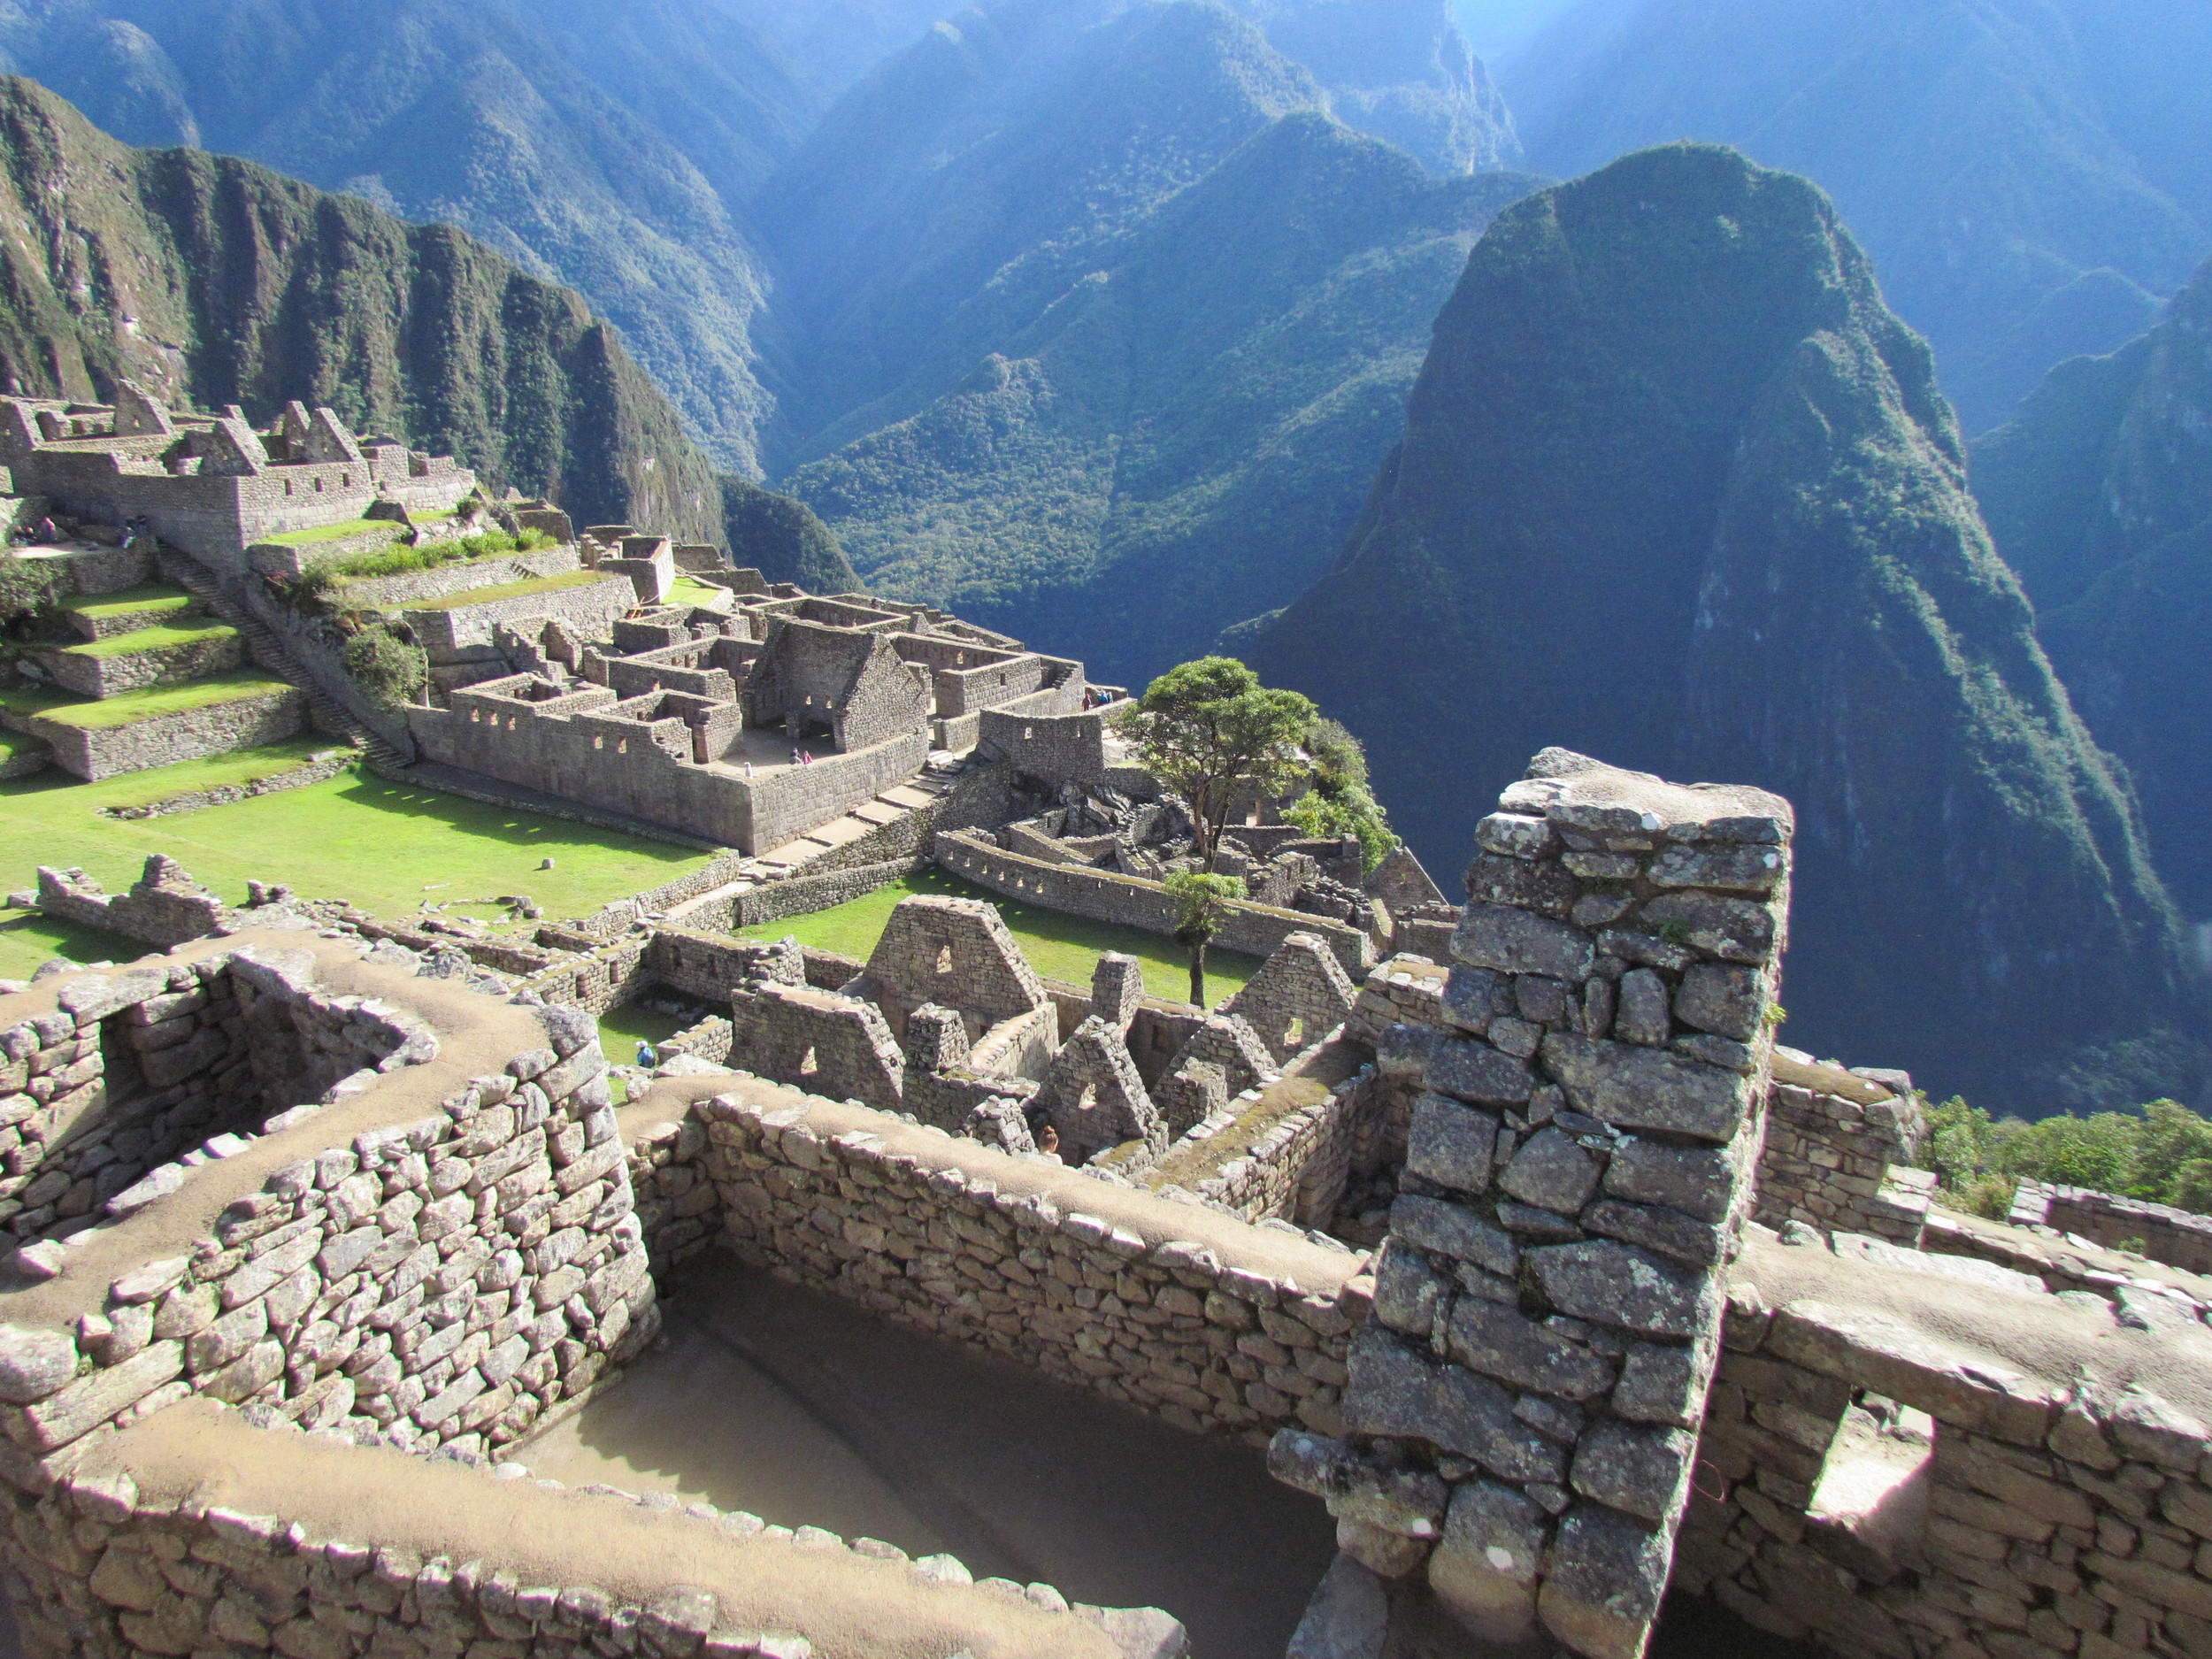 We learned about the daily living of the Incas